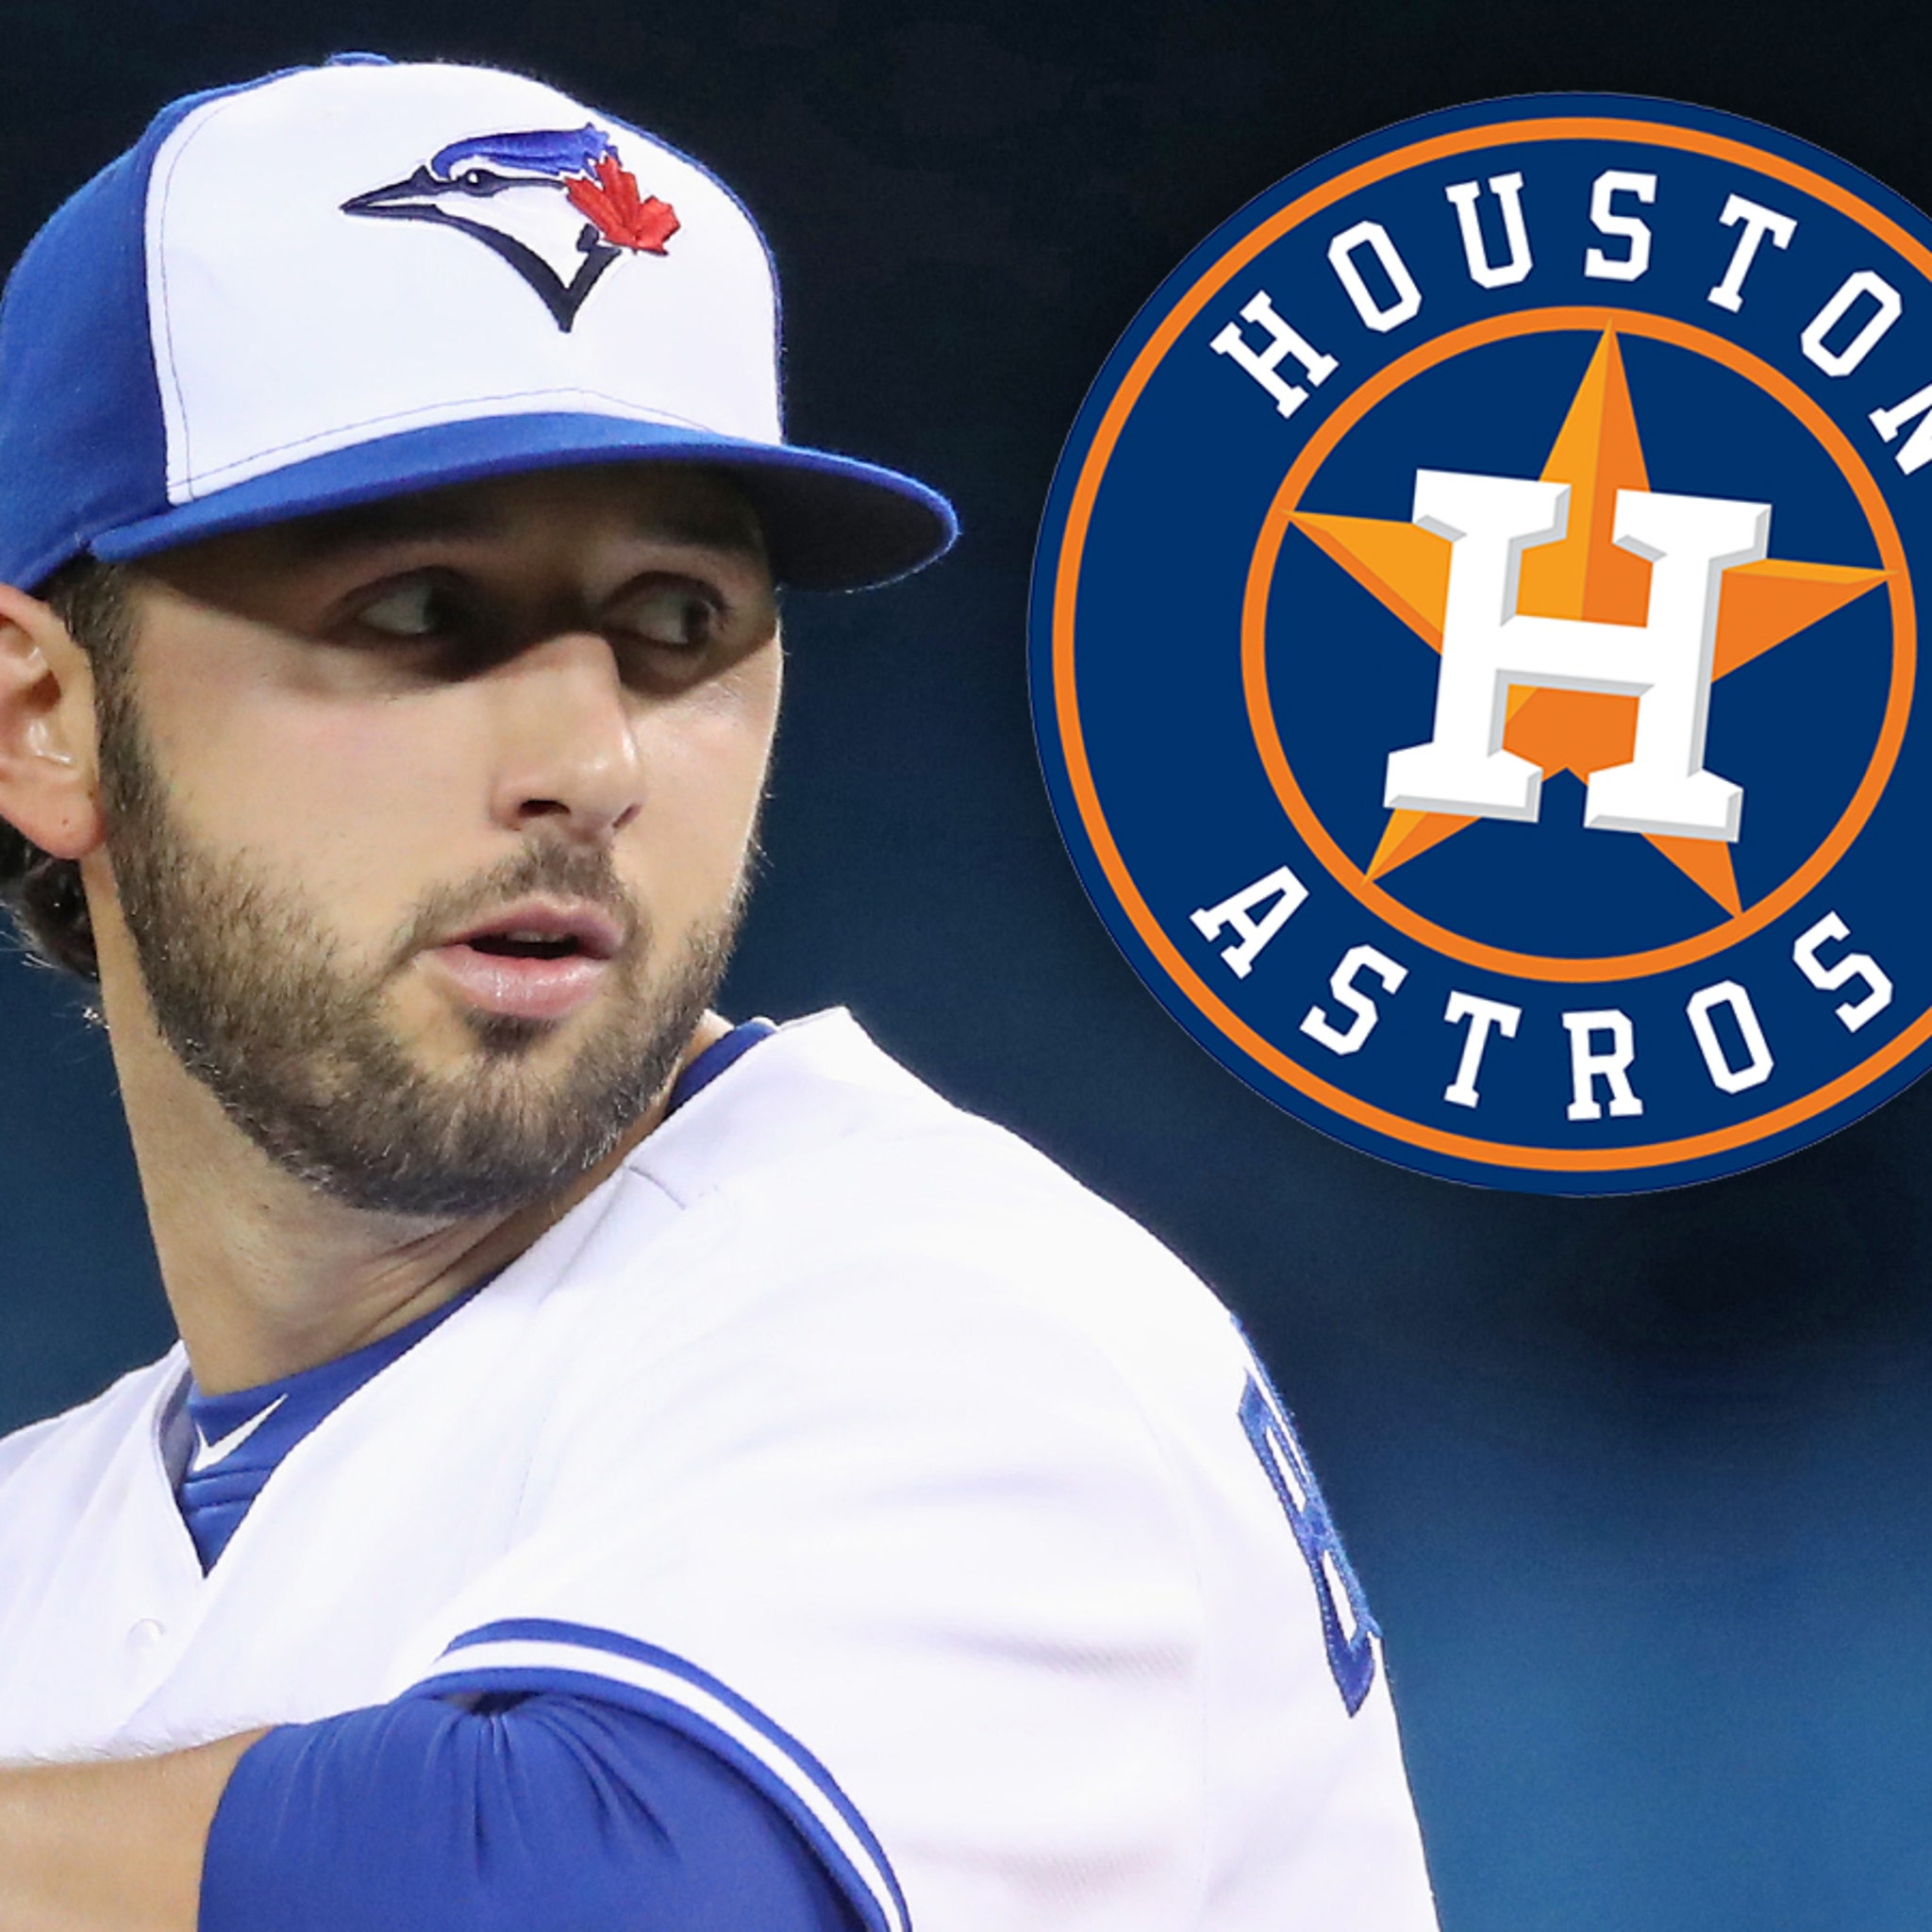 Ex-MLB Pitcher Sues Astros Over Cheating Scandal, You Ruined My Career!